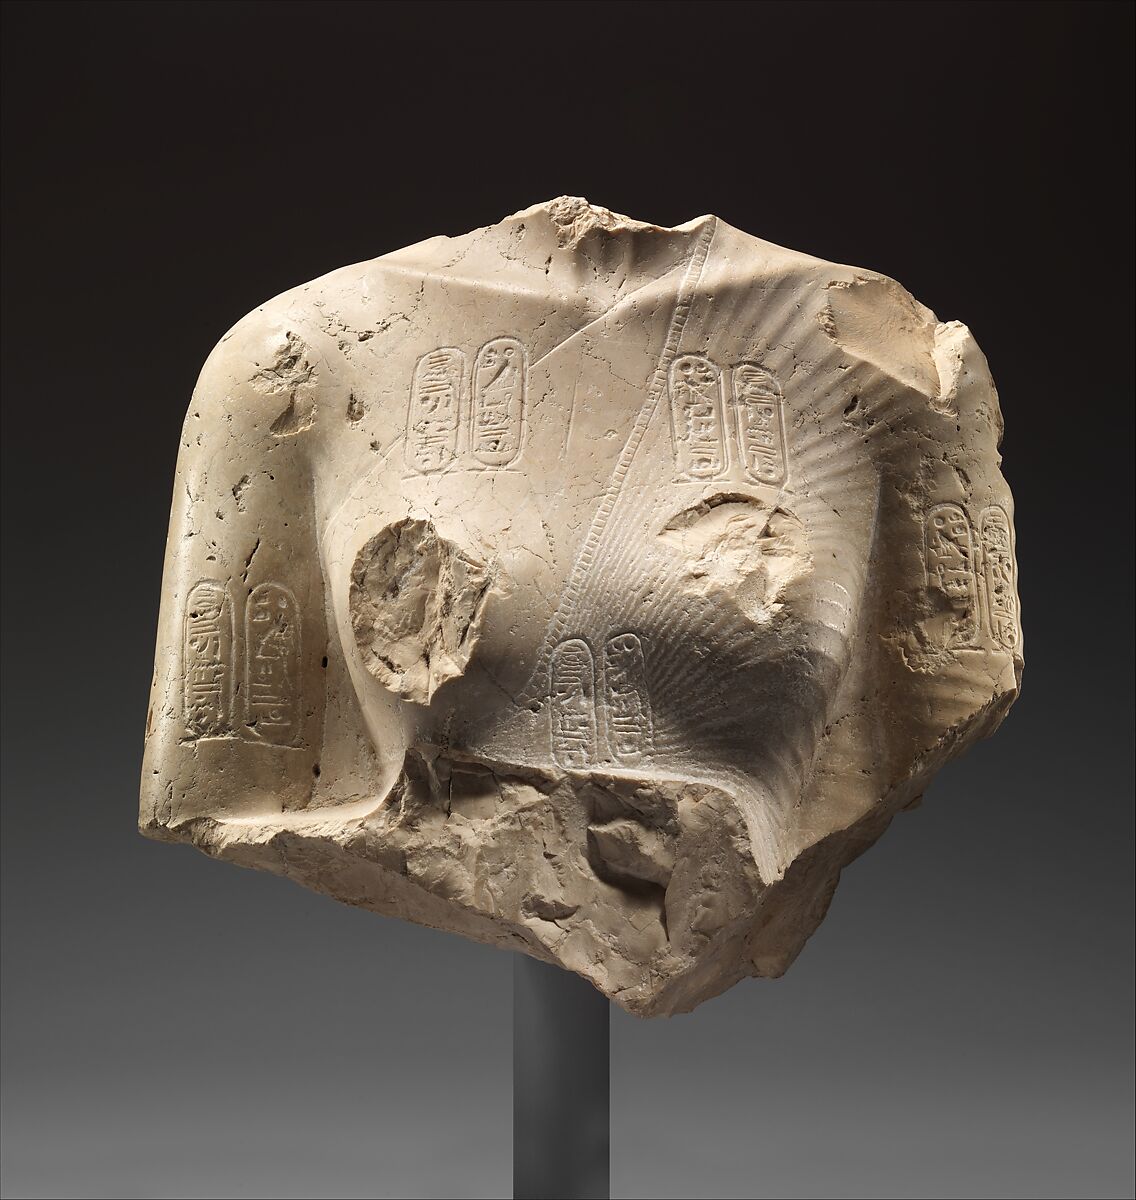 Torso of Nefertiti from a dyad holding a stela in front of the bodies, Indurated limestone 